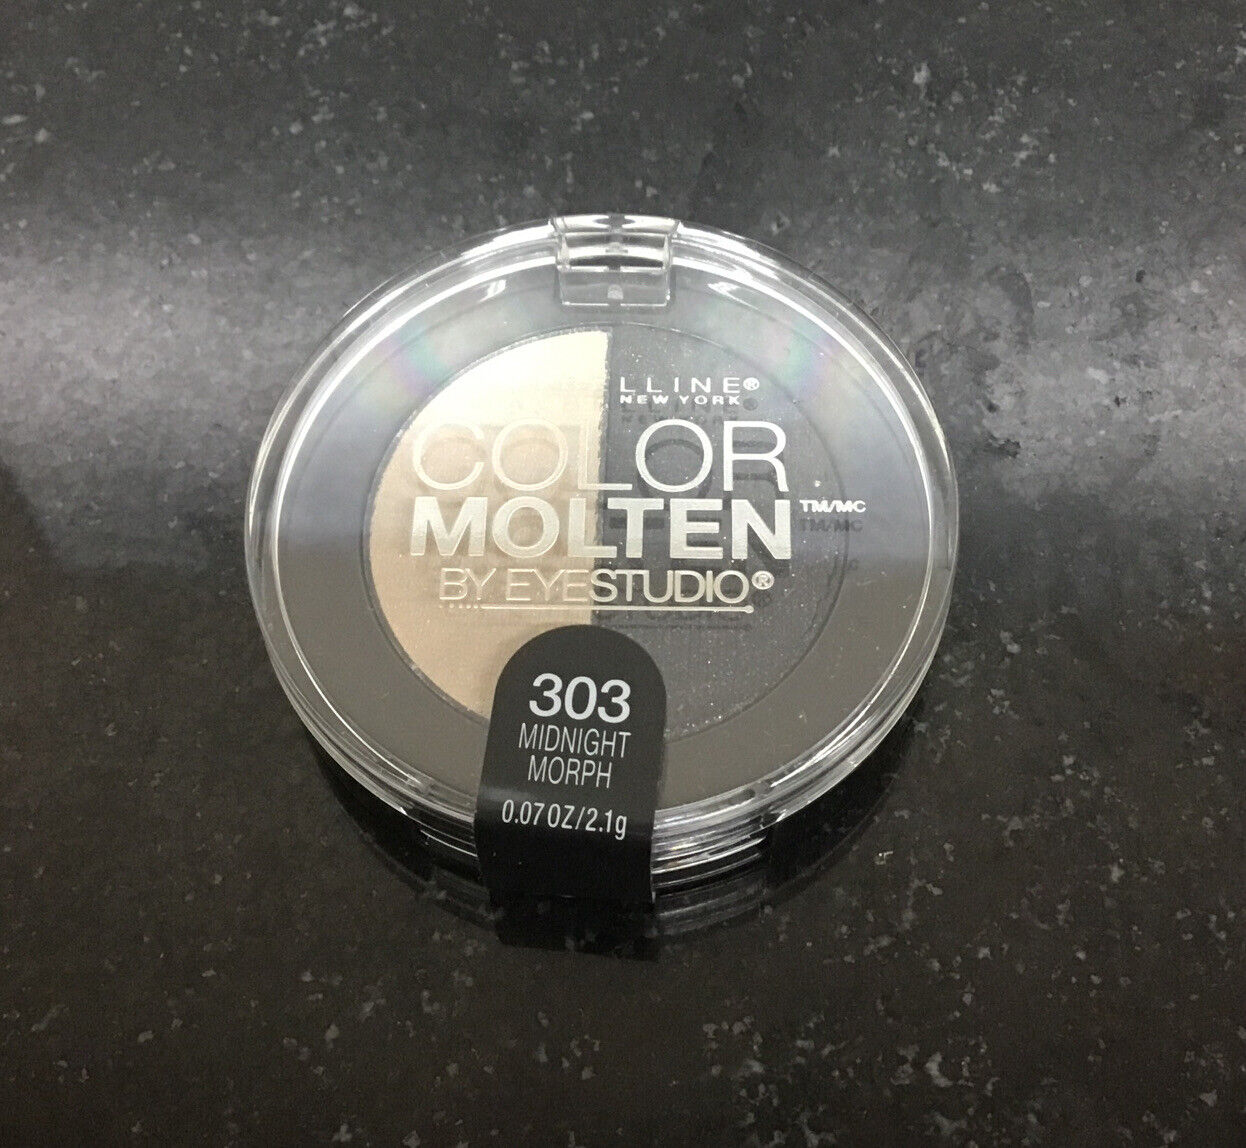 MAYBELLINE COLOR MOLTEN BY EYESTUDIO 303 MIDNIGHT MORPH- As Pictured